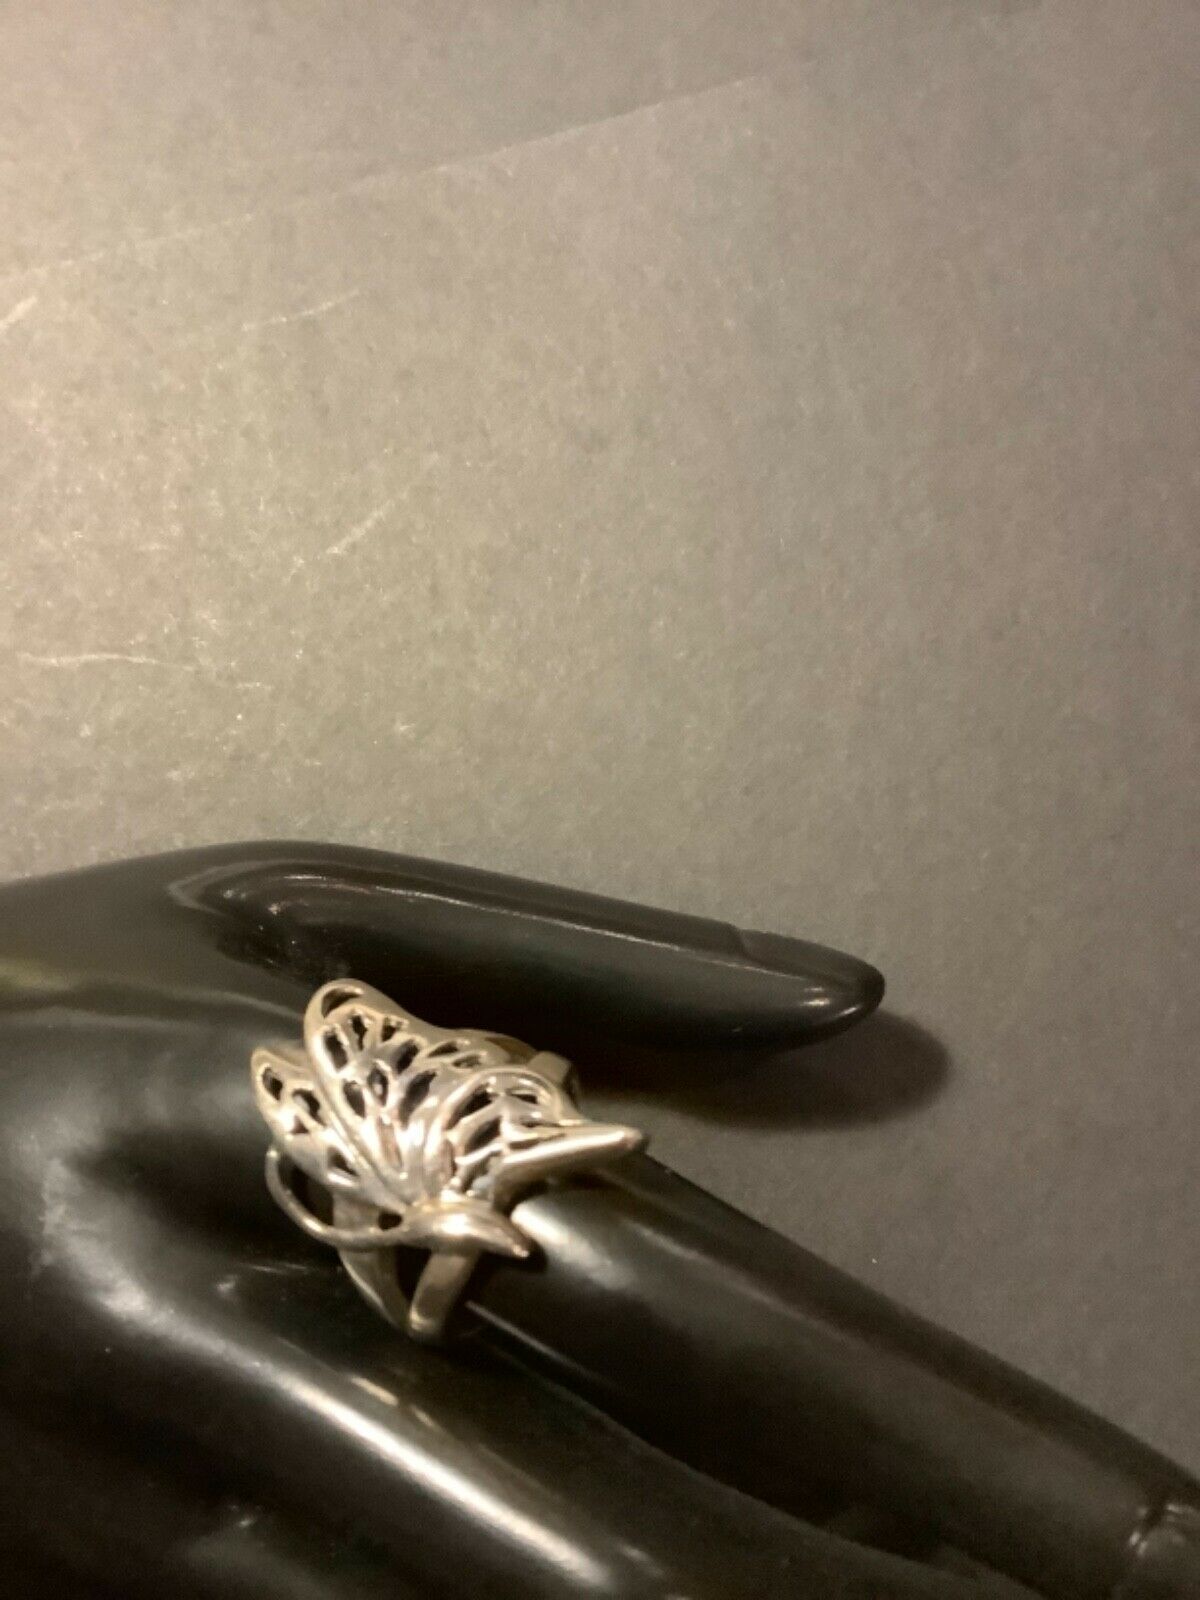 Large Sterling Silver Butterfly Ring,marked”925”,9.5g, Size 10.5